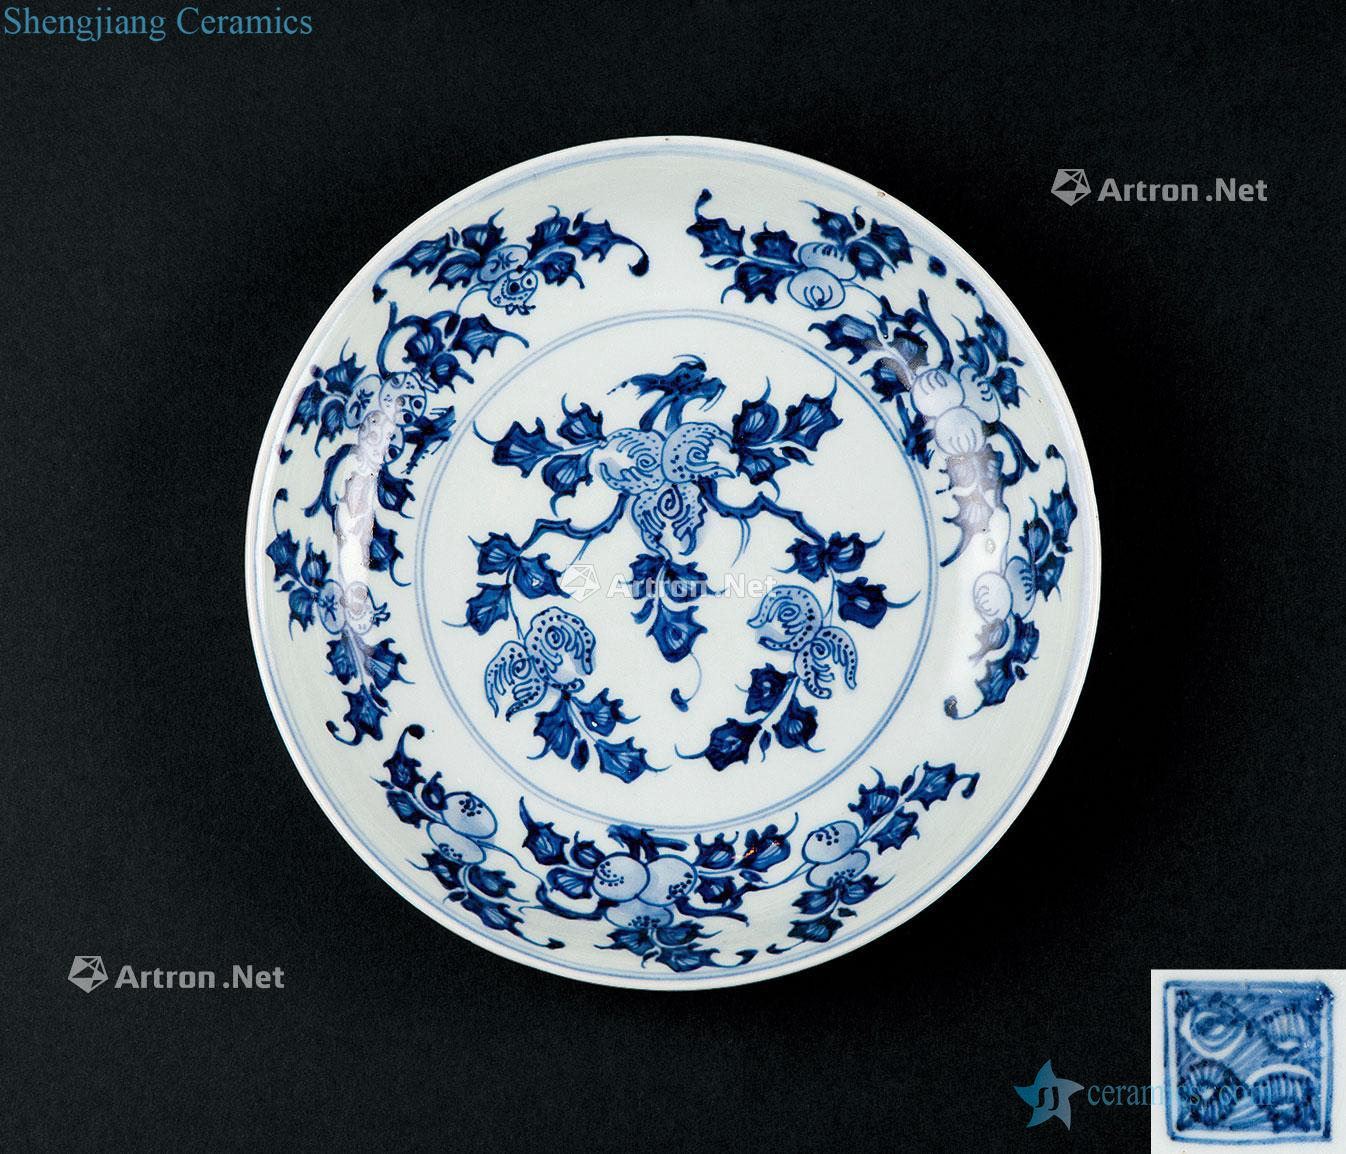 In the qing dynasty (1644-1911) blue and white many children the tray